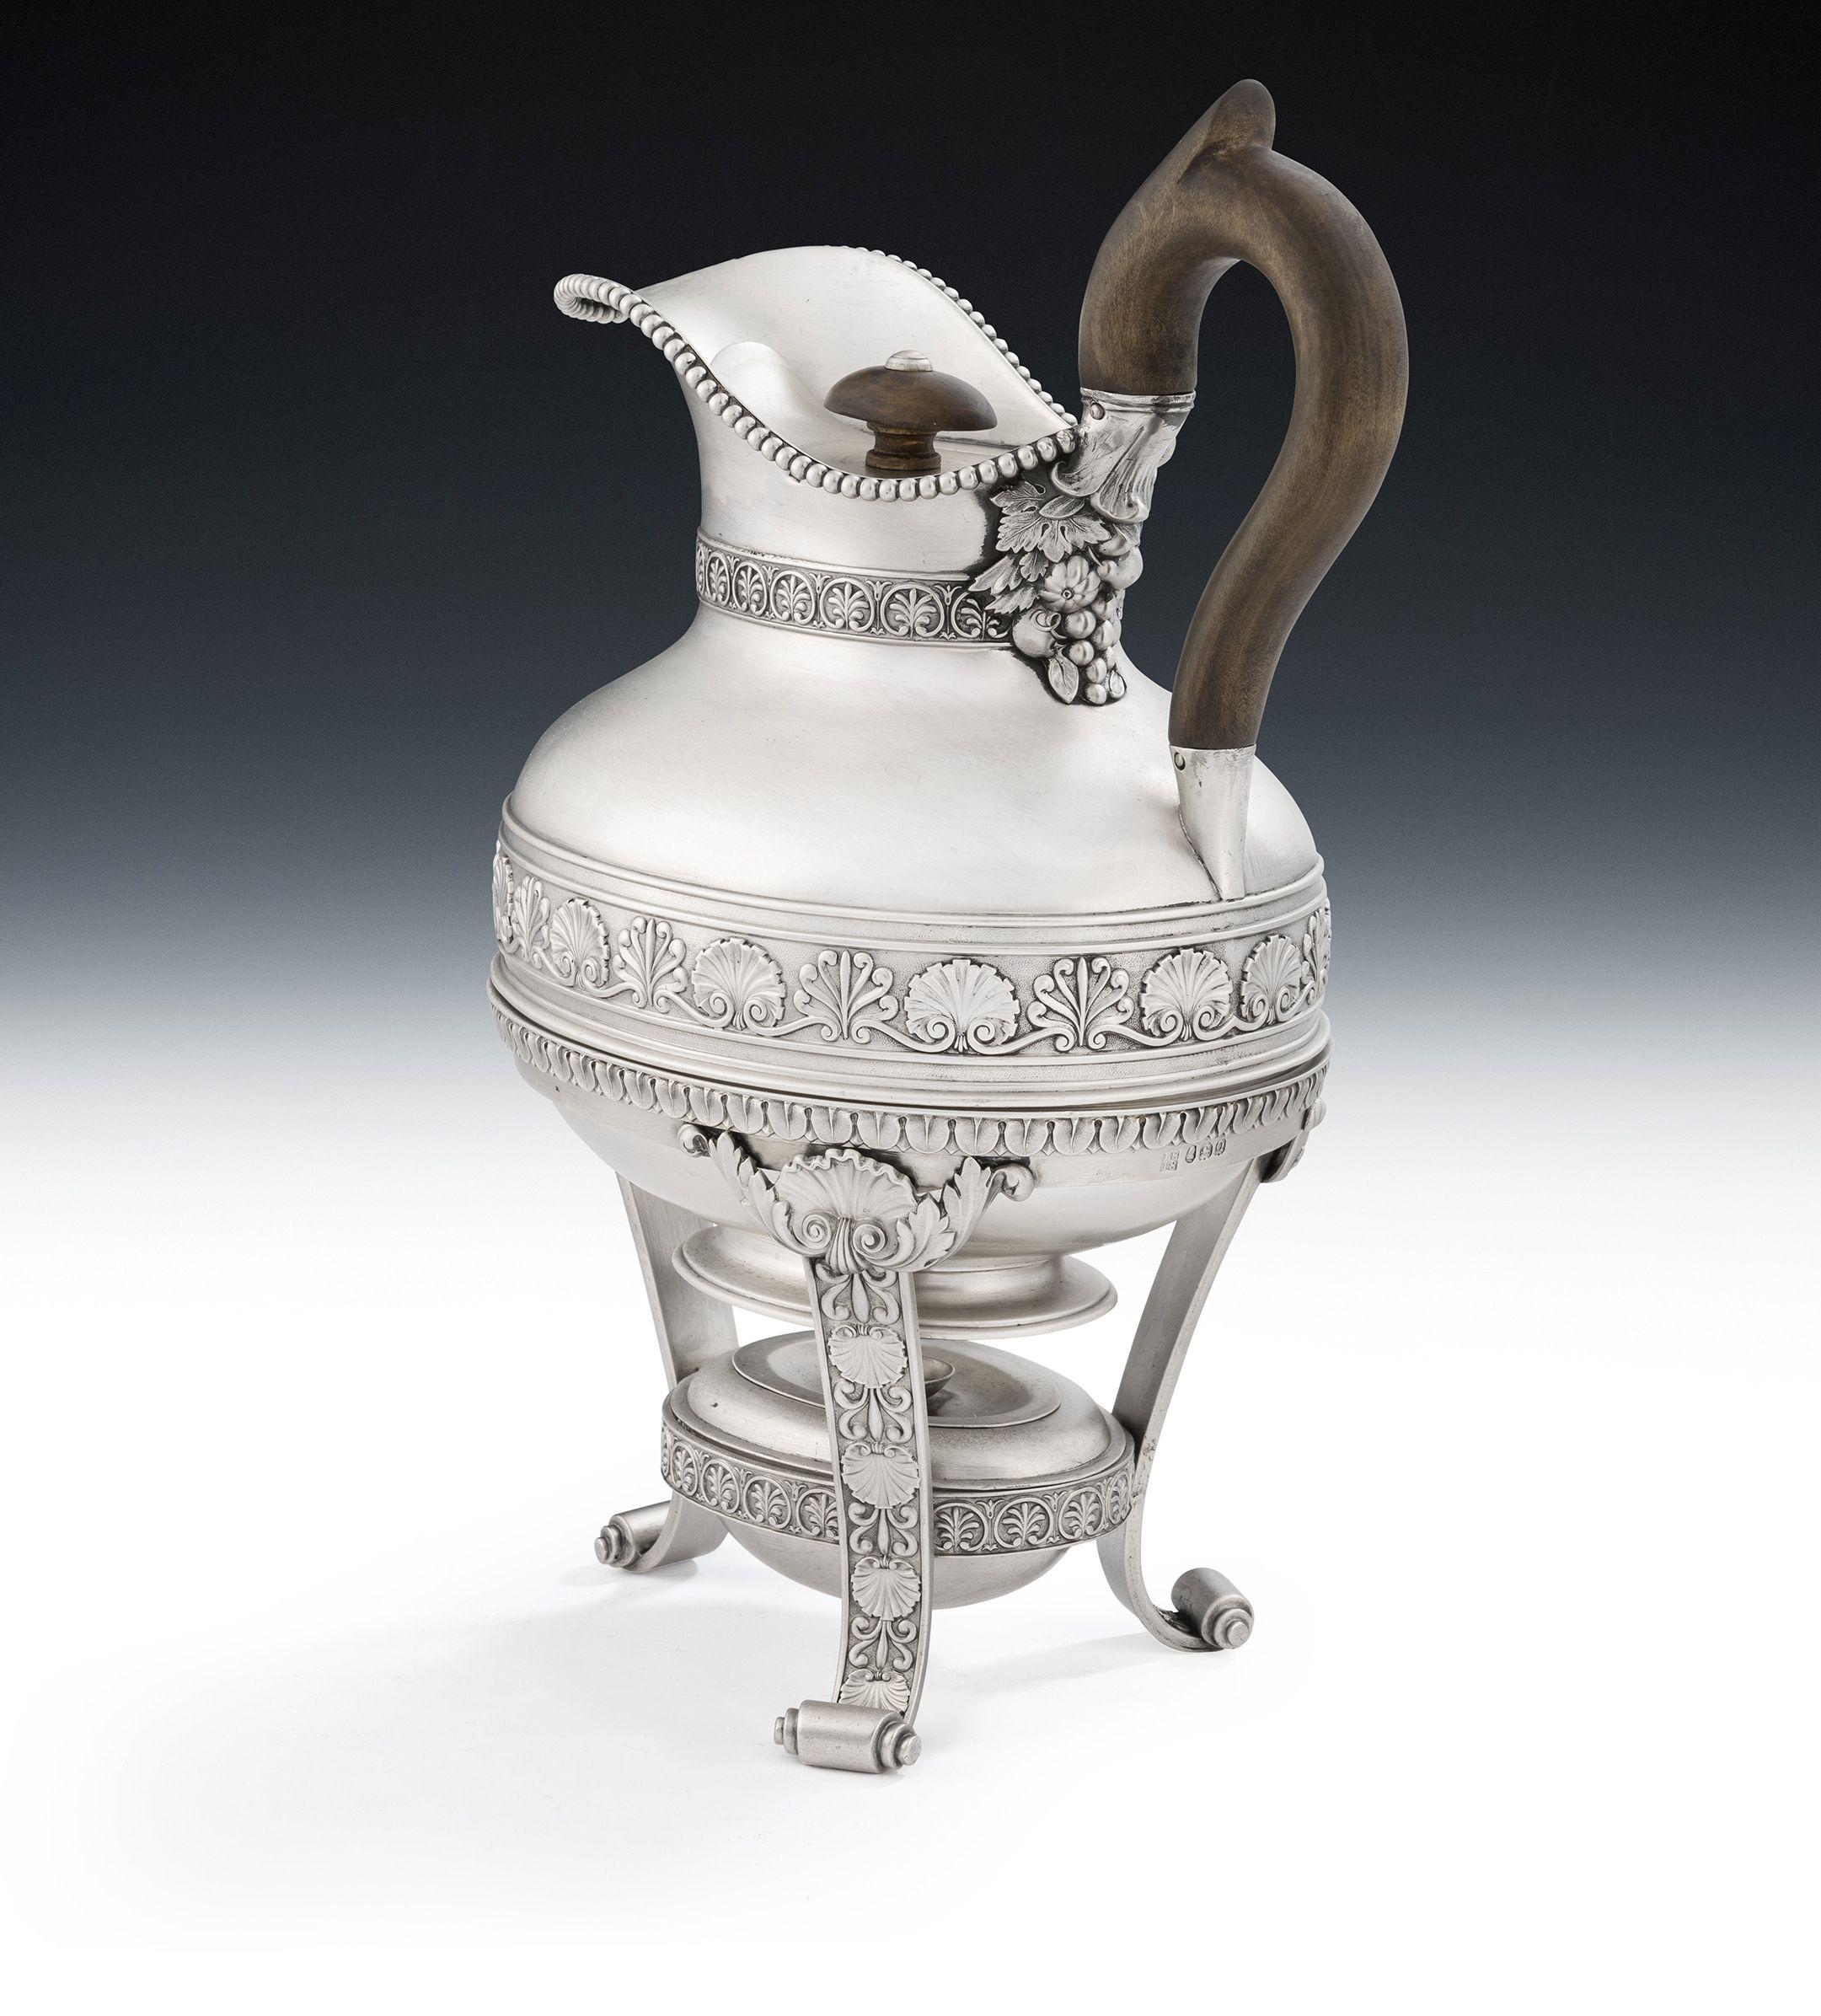 A very fine and unusual George III Biggin on Lampstand made in London in 1811 by the Royal silversmiths, Benjamin & James Smith.

The Jug is of compressed egg shaped form with an applied beaded rim.  The neck is cast and decorated with palm motifs,